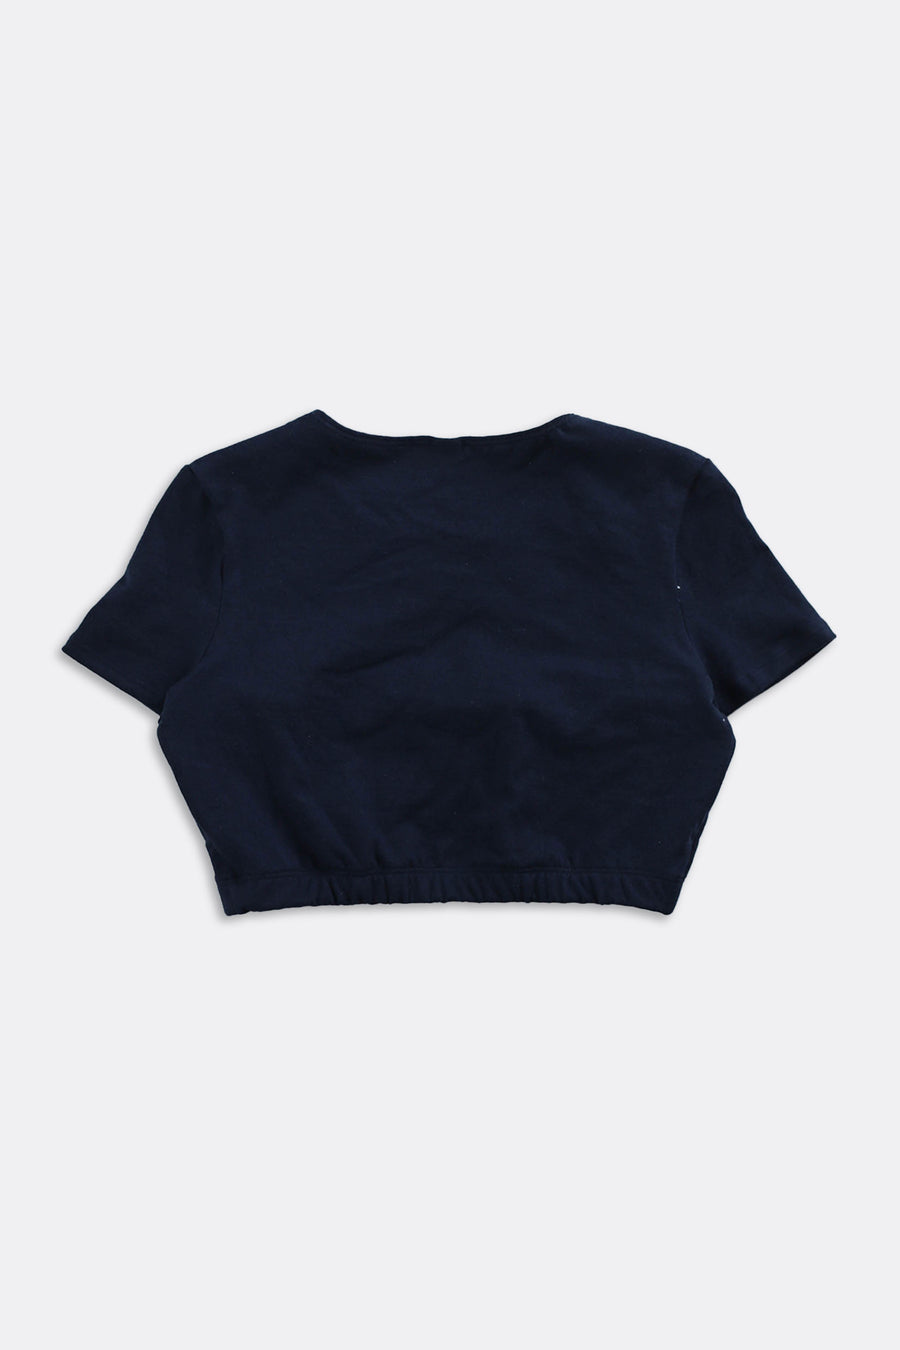 Rework Champion Cut Out Tee - L